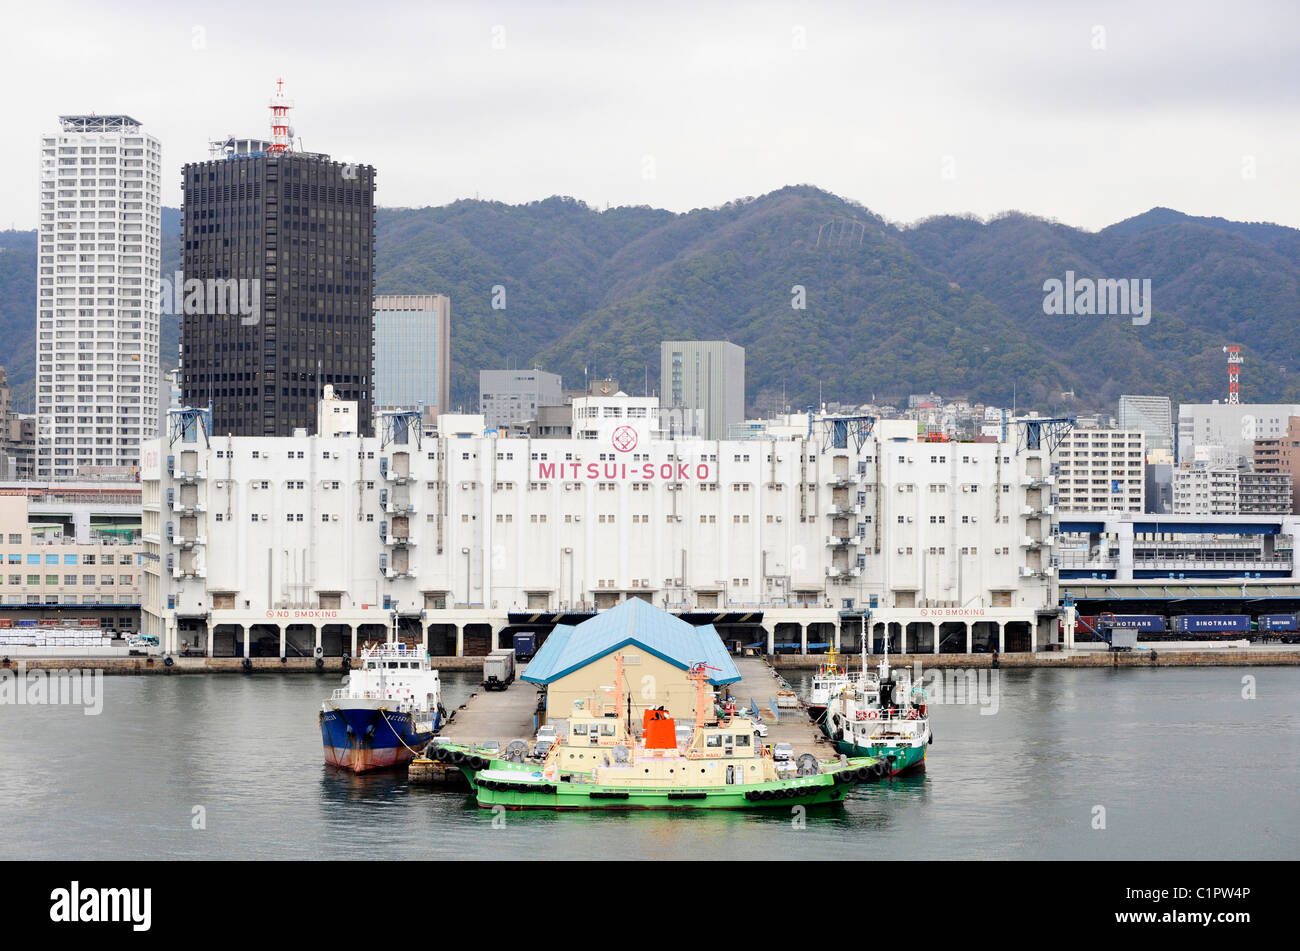 Mitsui Building Stock Photos & Mitsui Building Stock Images - Alamy1300 x 950